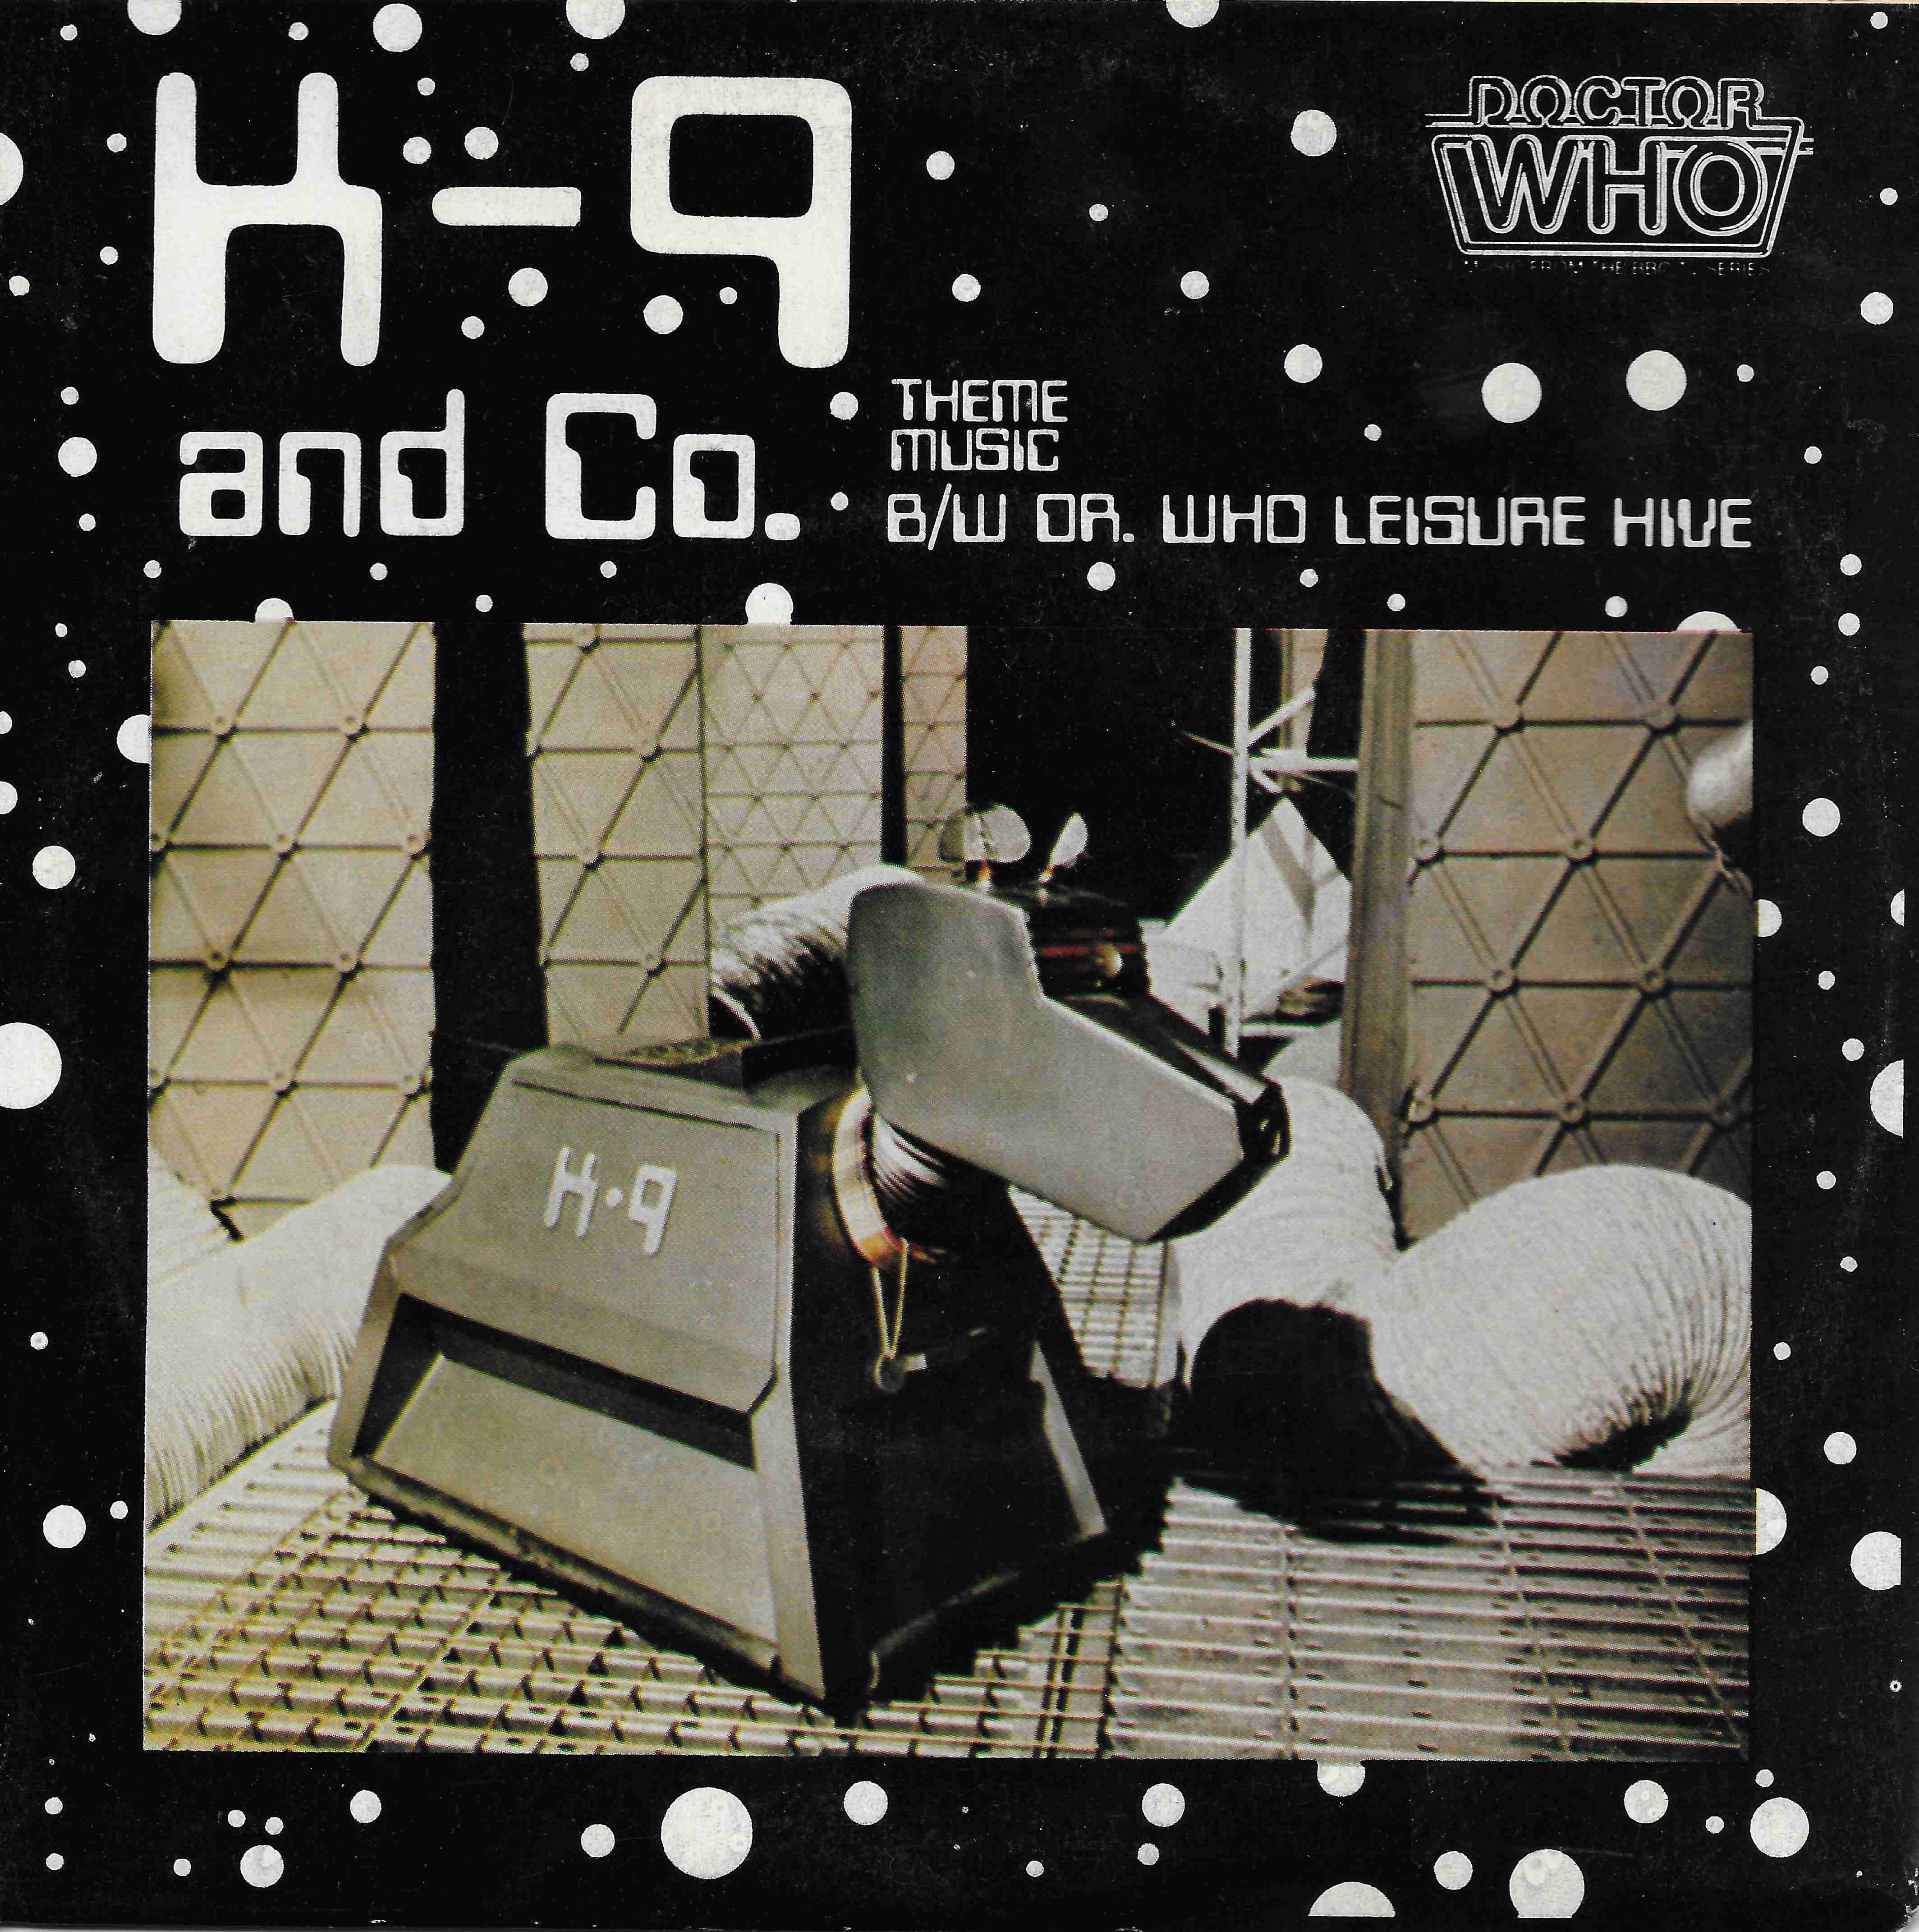 Picture of BBC - 456 K-9 and Co. (US import) single by artist Flachra Trench / Ian Levine from the BBC records and Tapes library